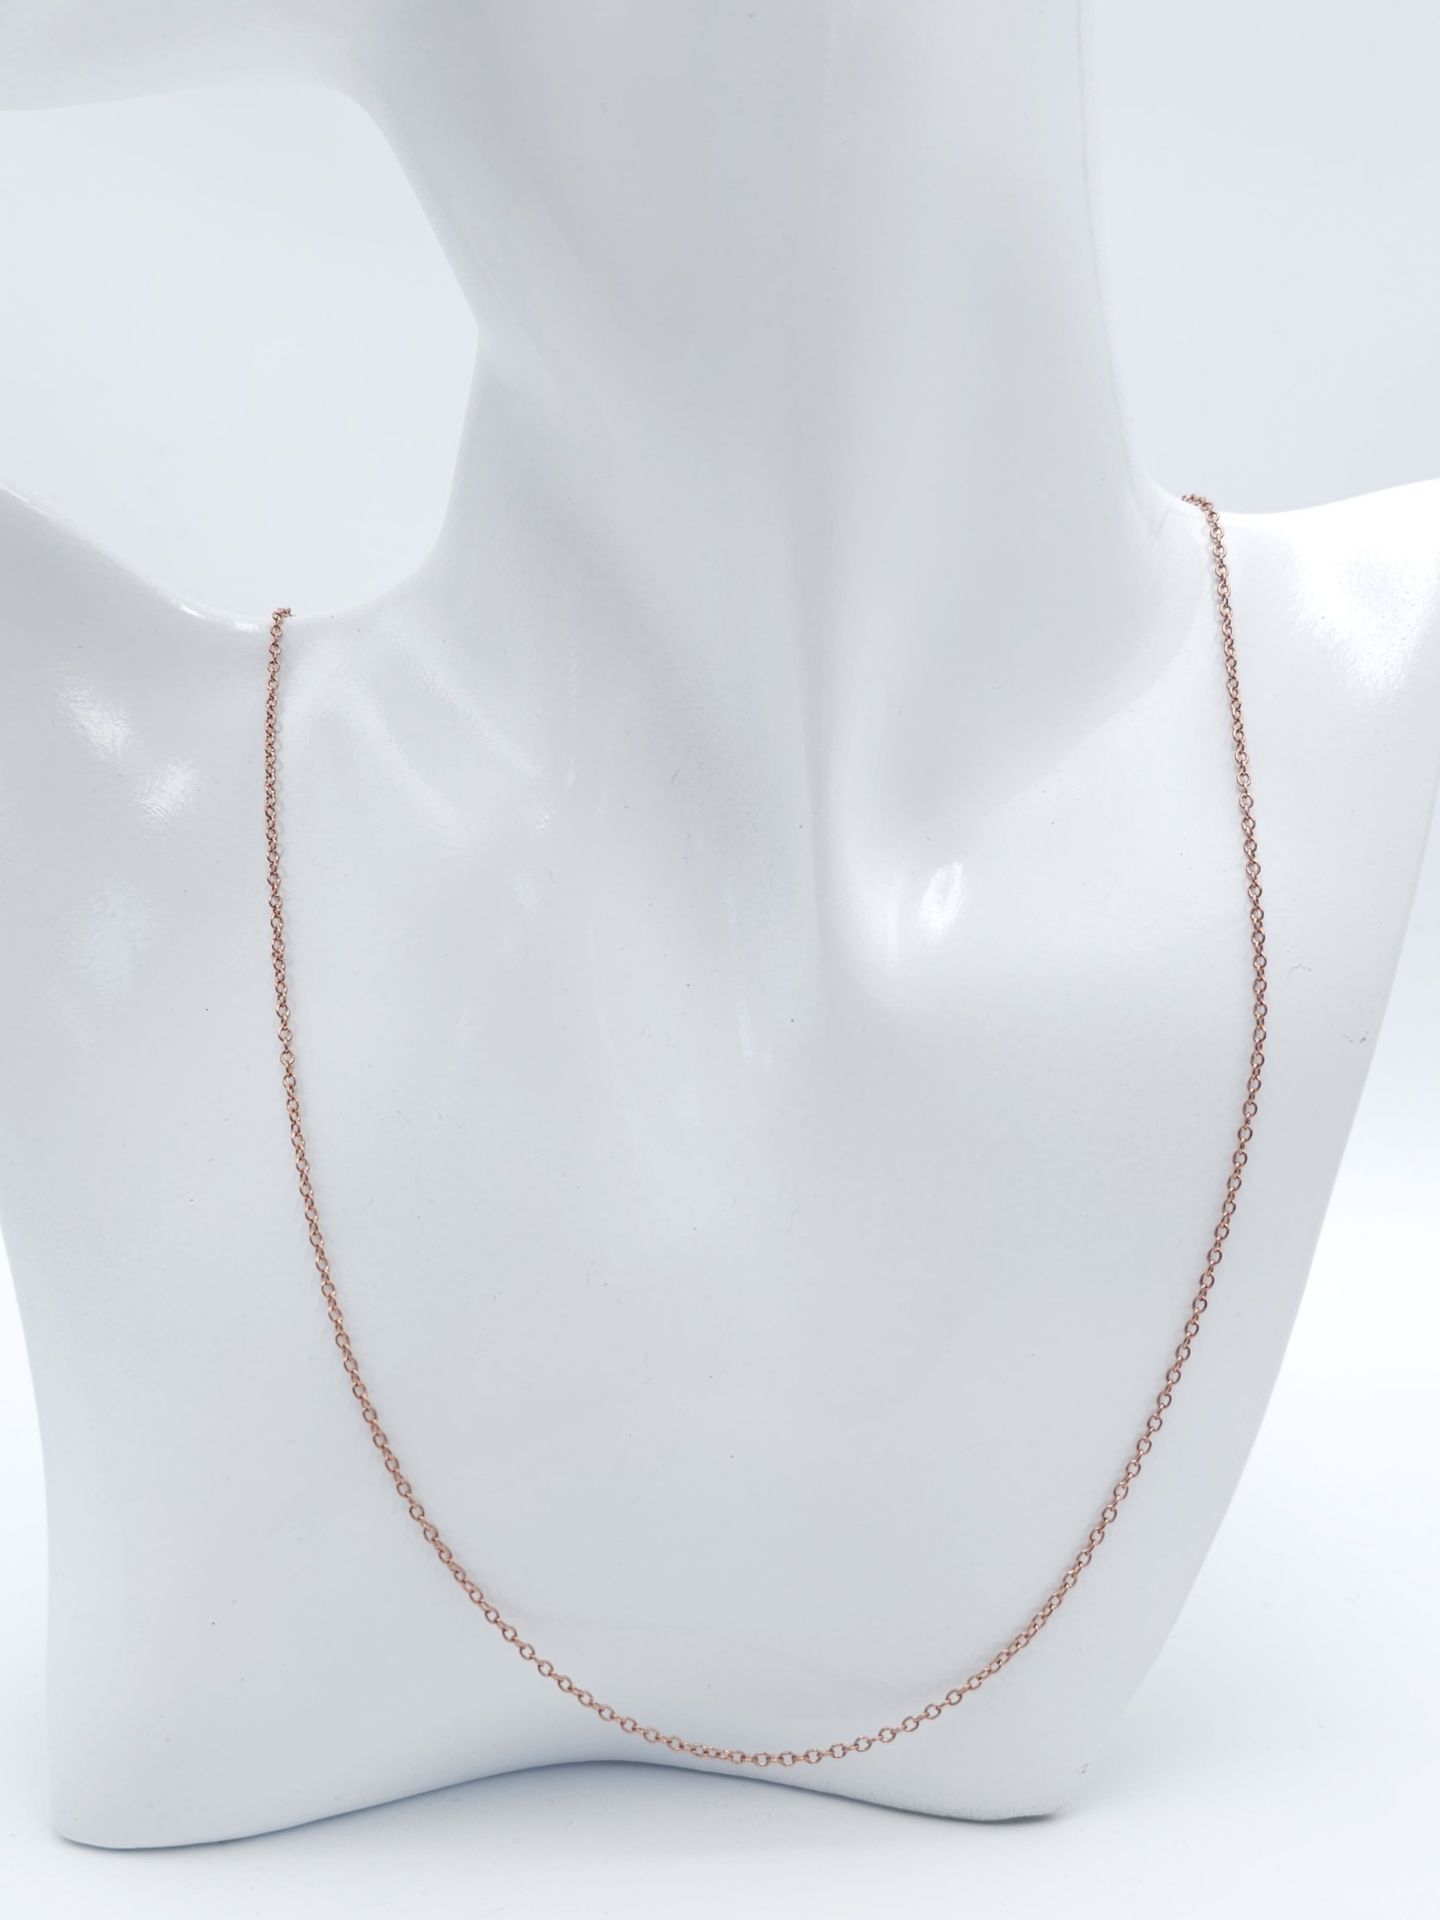 A Parcel of 4 x 60cm Length Unworn Rose Gold-Toned Sterling Silver Chain Necklaces. Comprising 3 x - Image 6 of 21